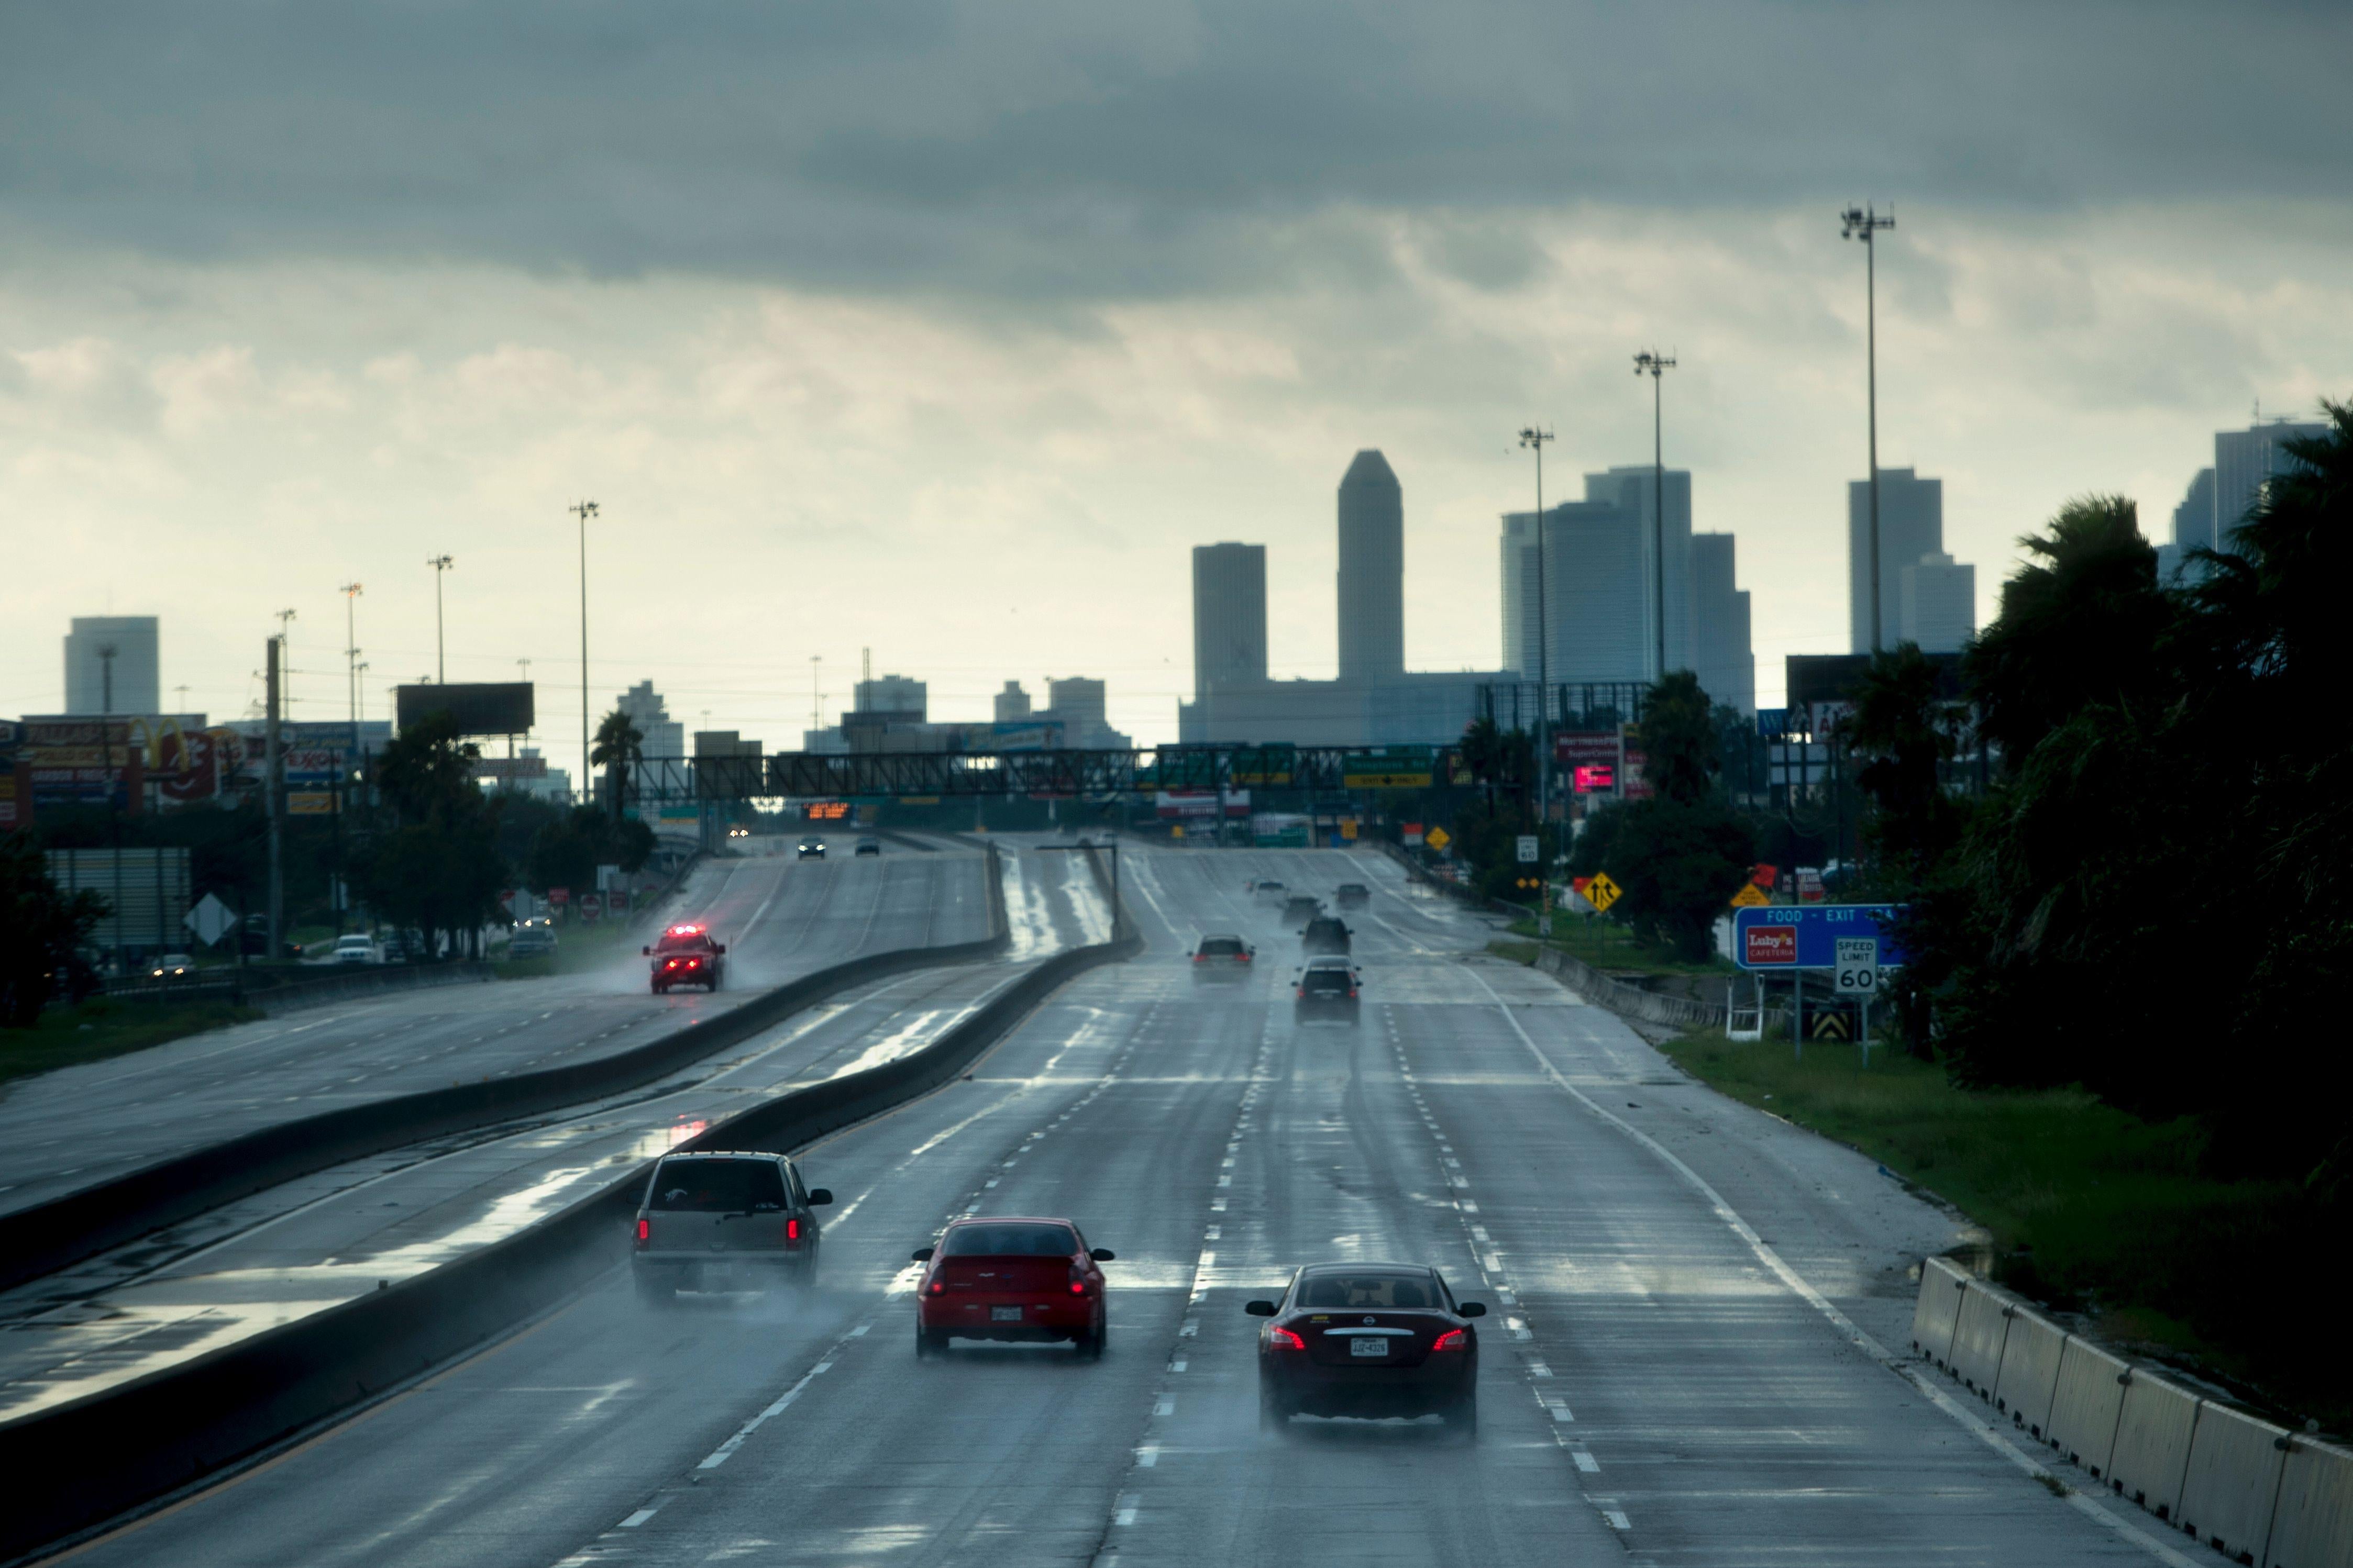 Cars are seen driving on a highway.